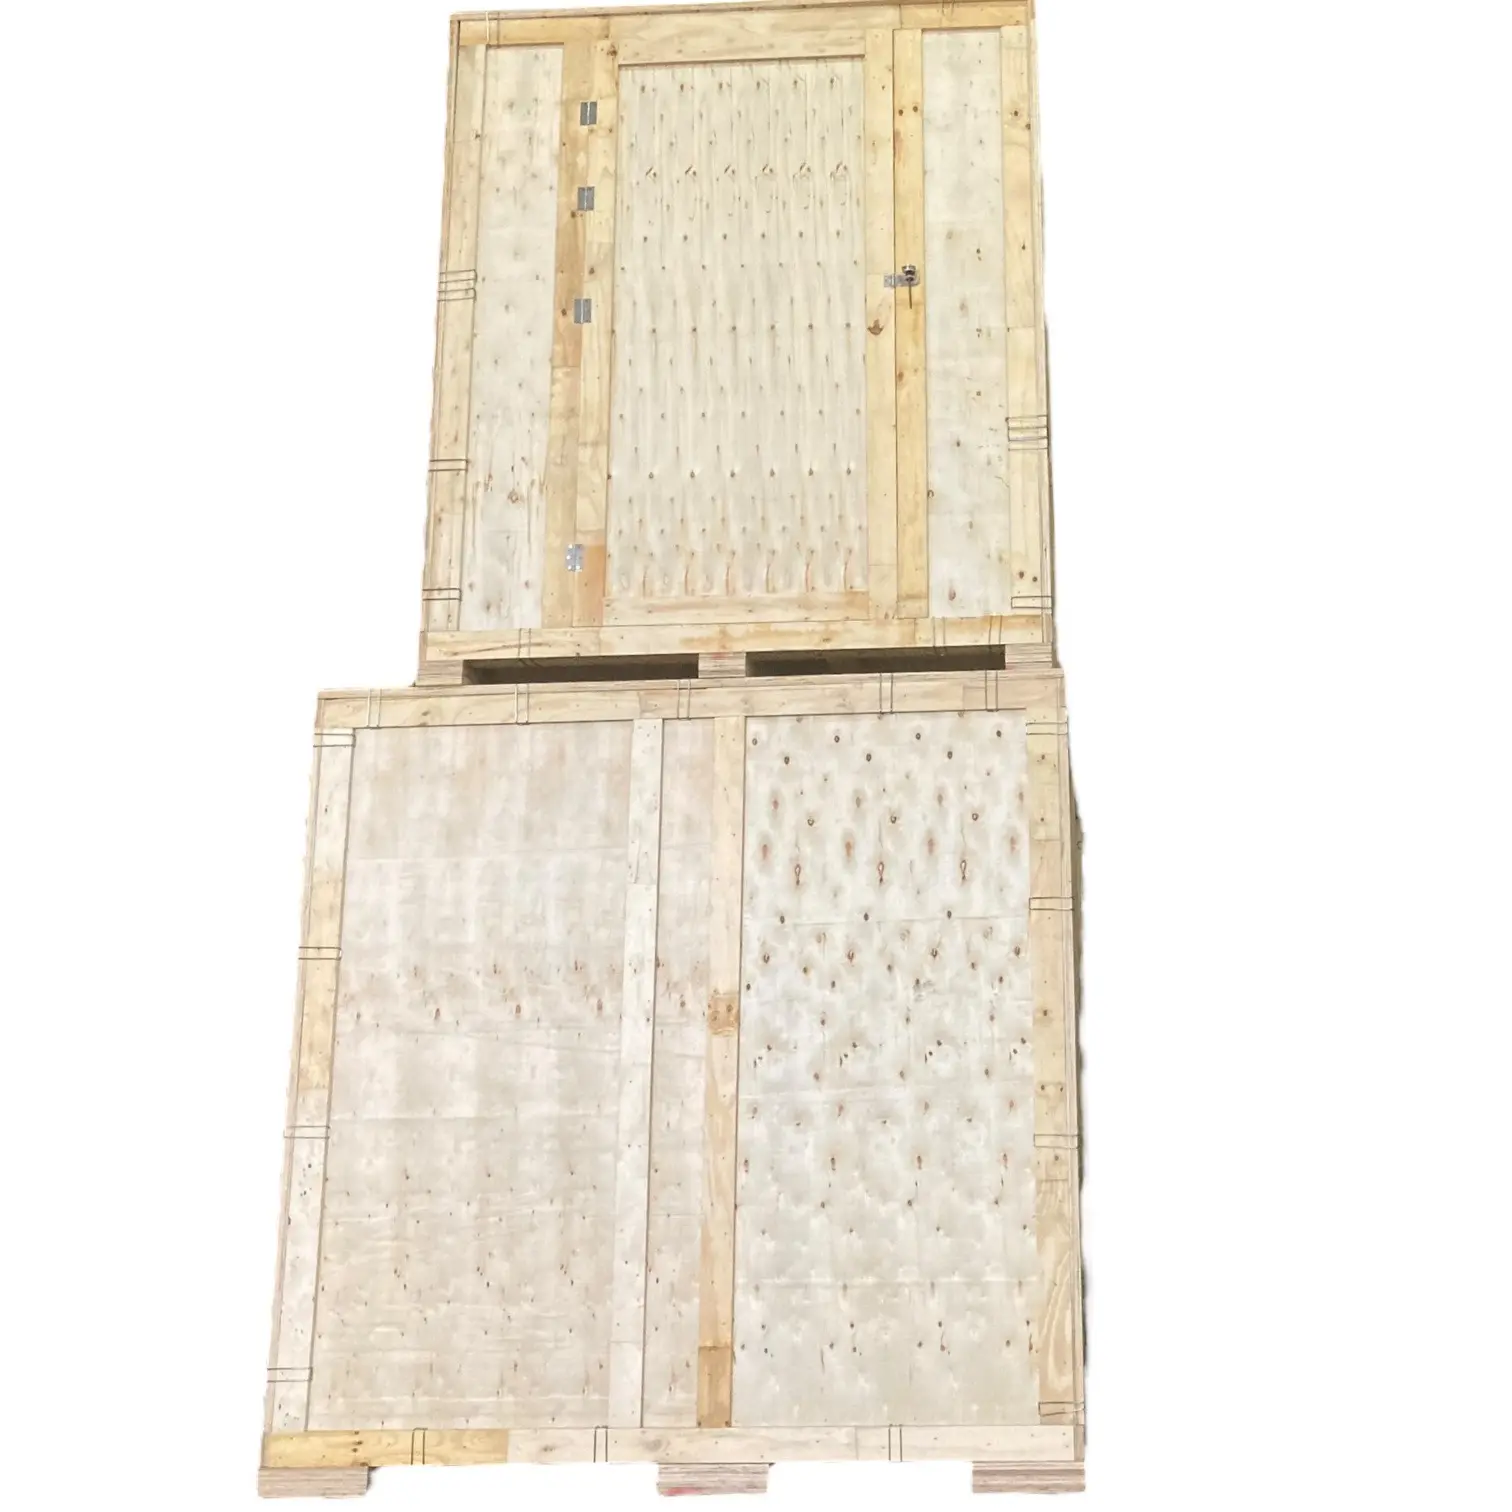 Wholesale Wooden Crates Made From Environmentally Friendly Plywood International Standard Wooden Crates Made In Vietnam